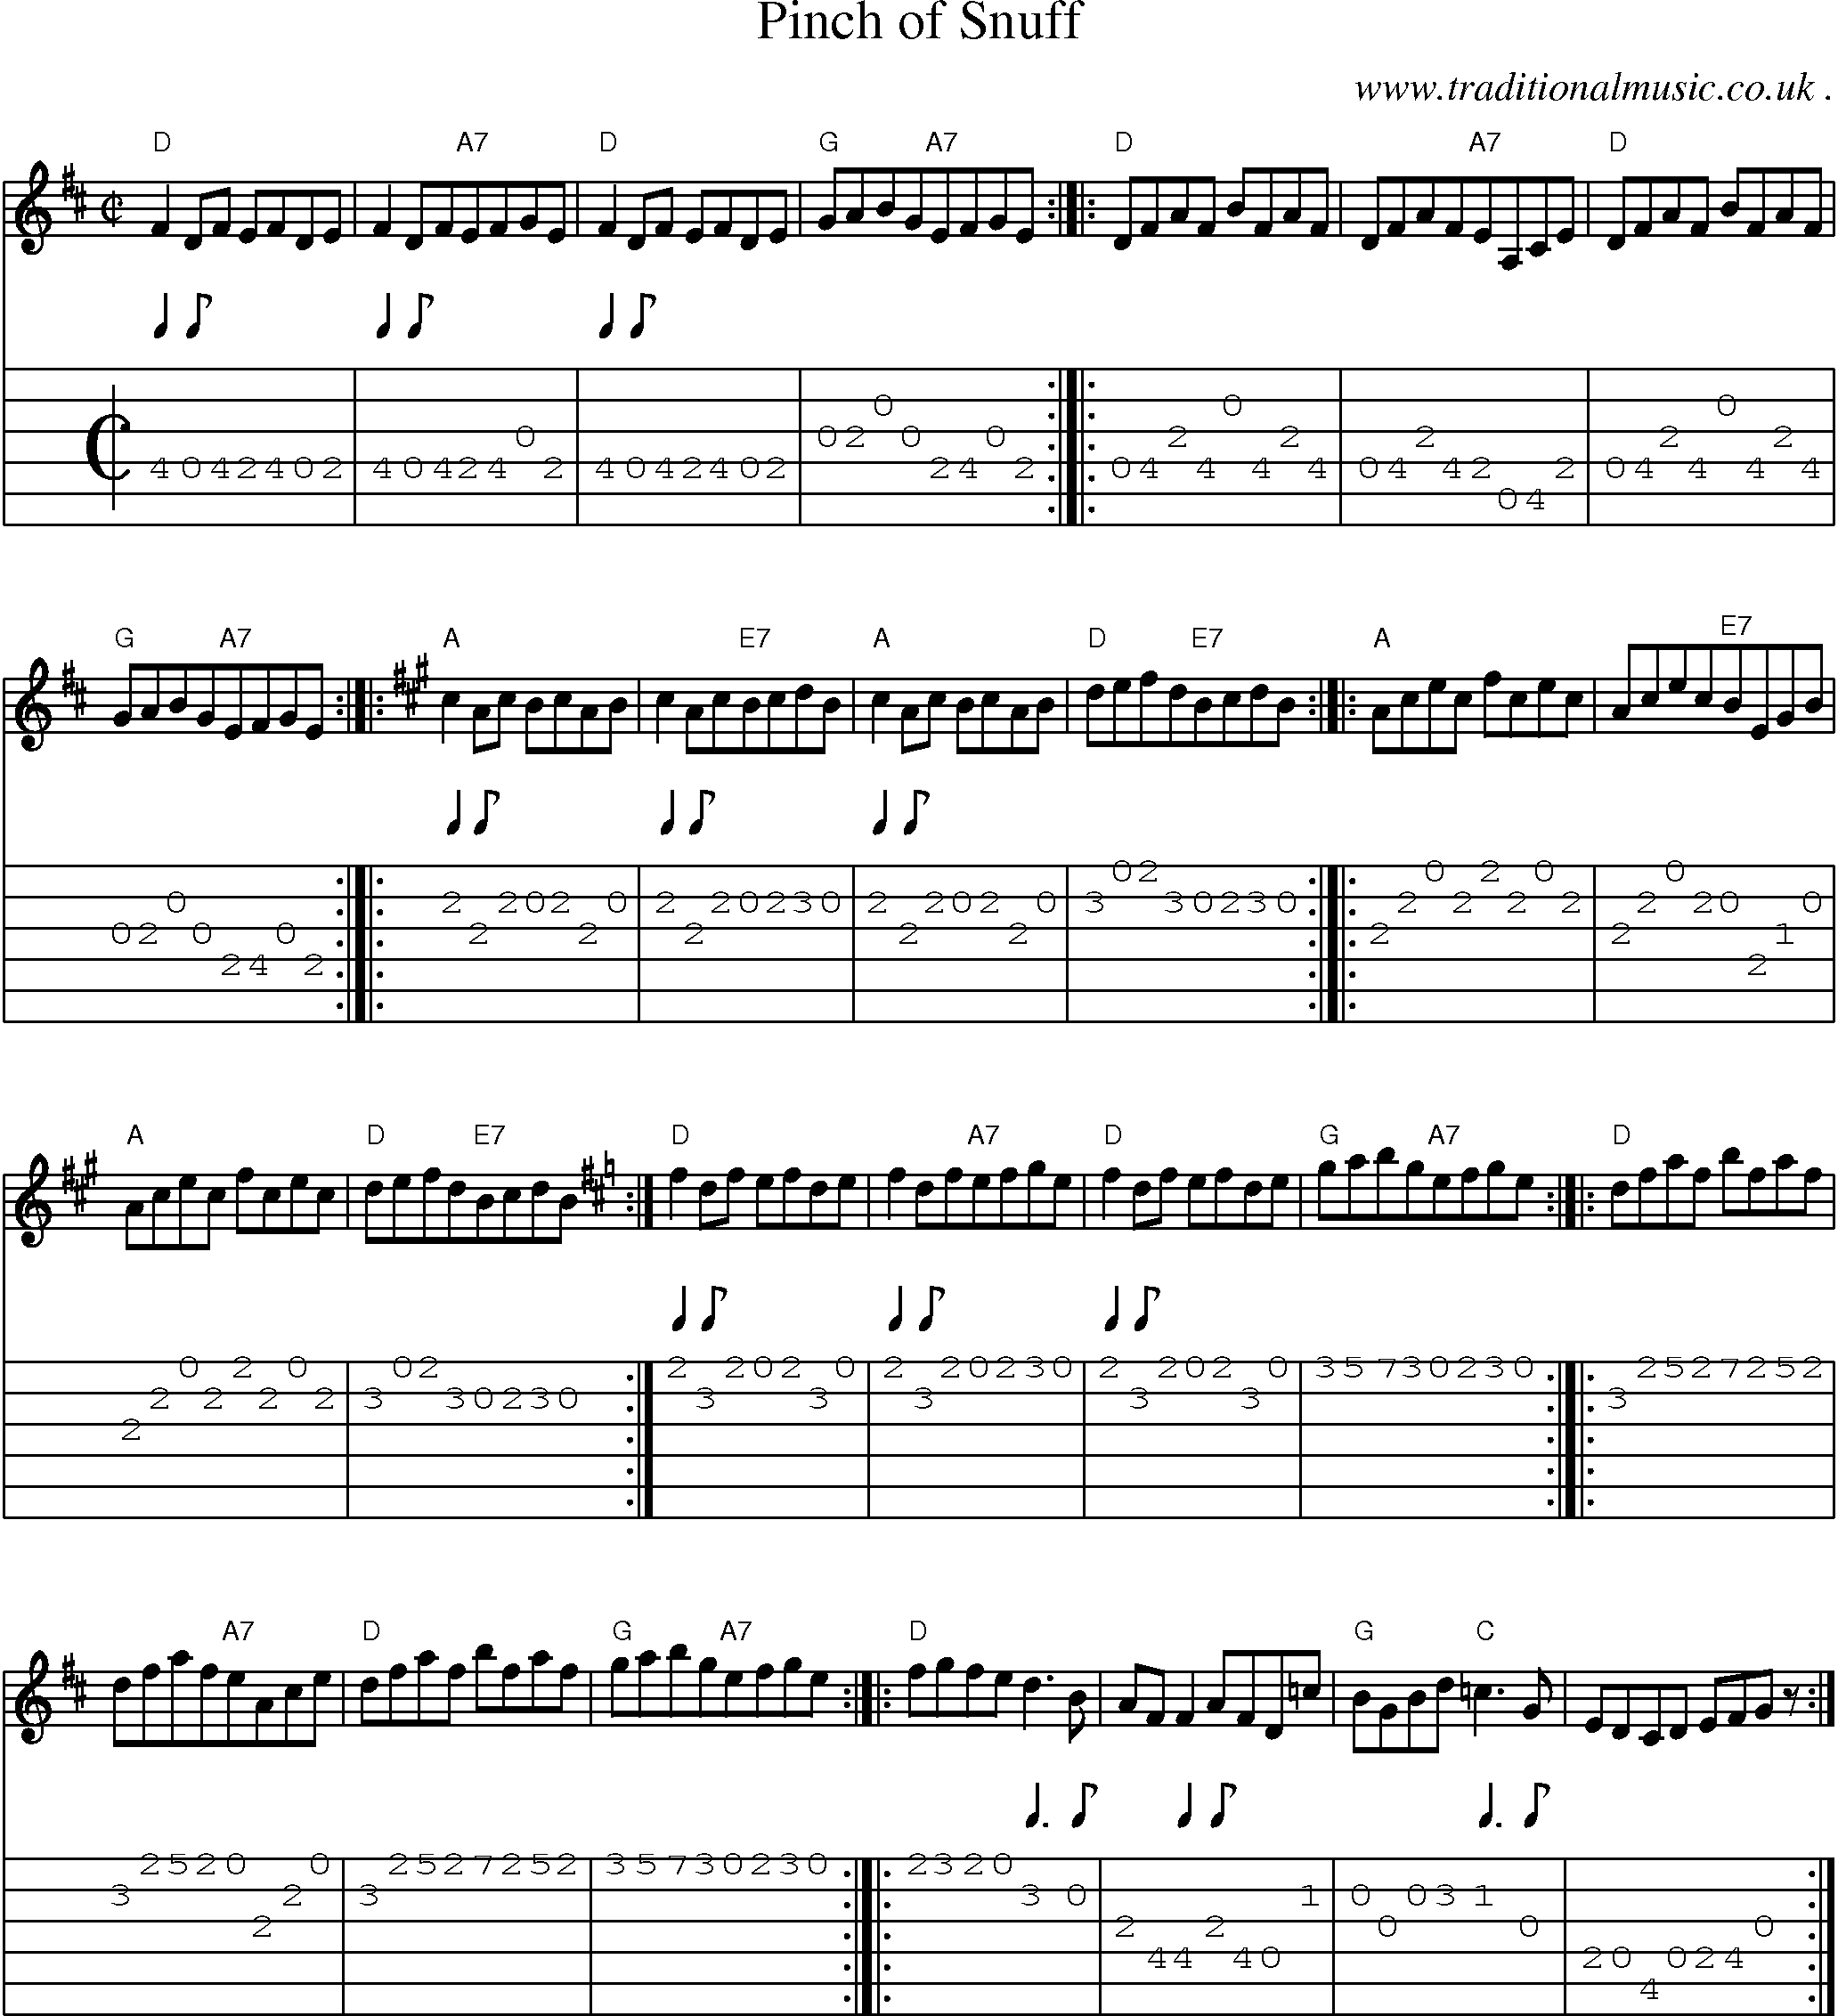 Sheet-Music and Guitar Tabs for Pinch Of Snuff